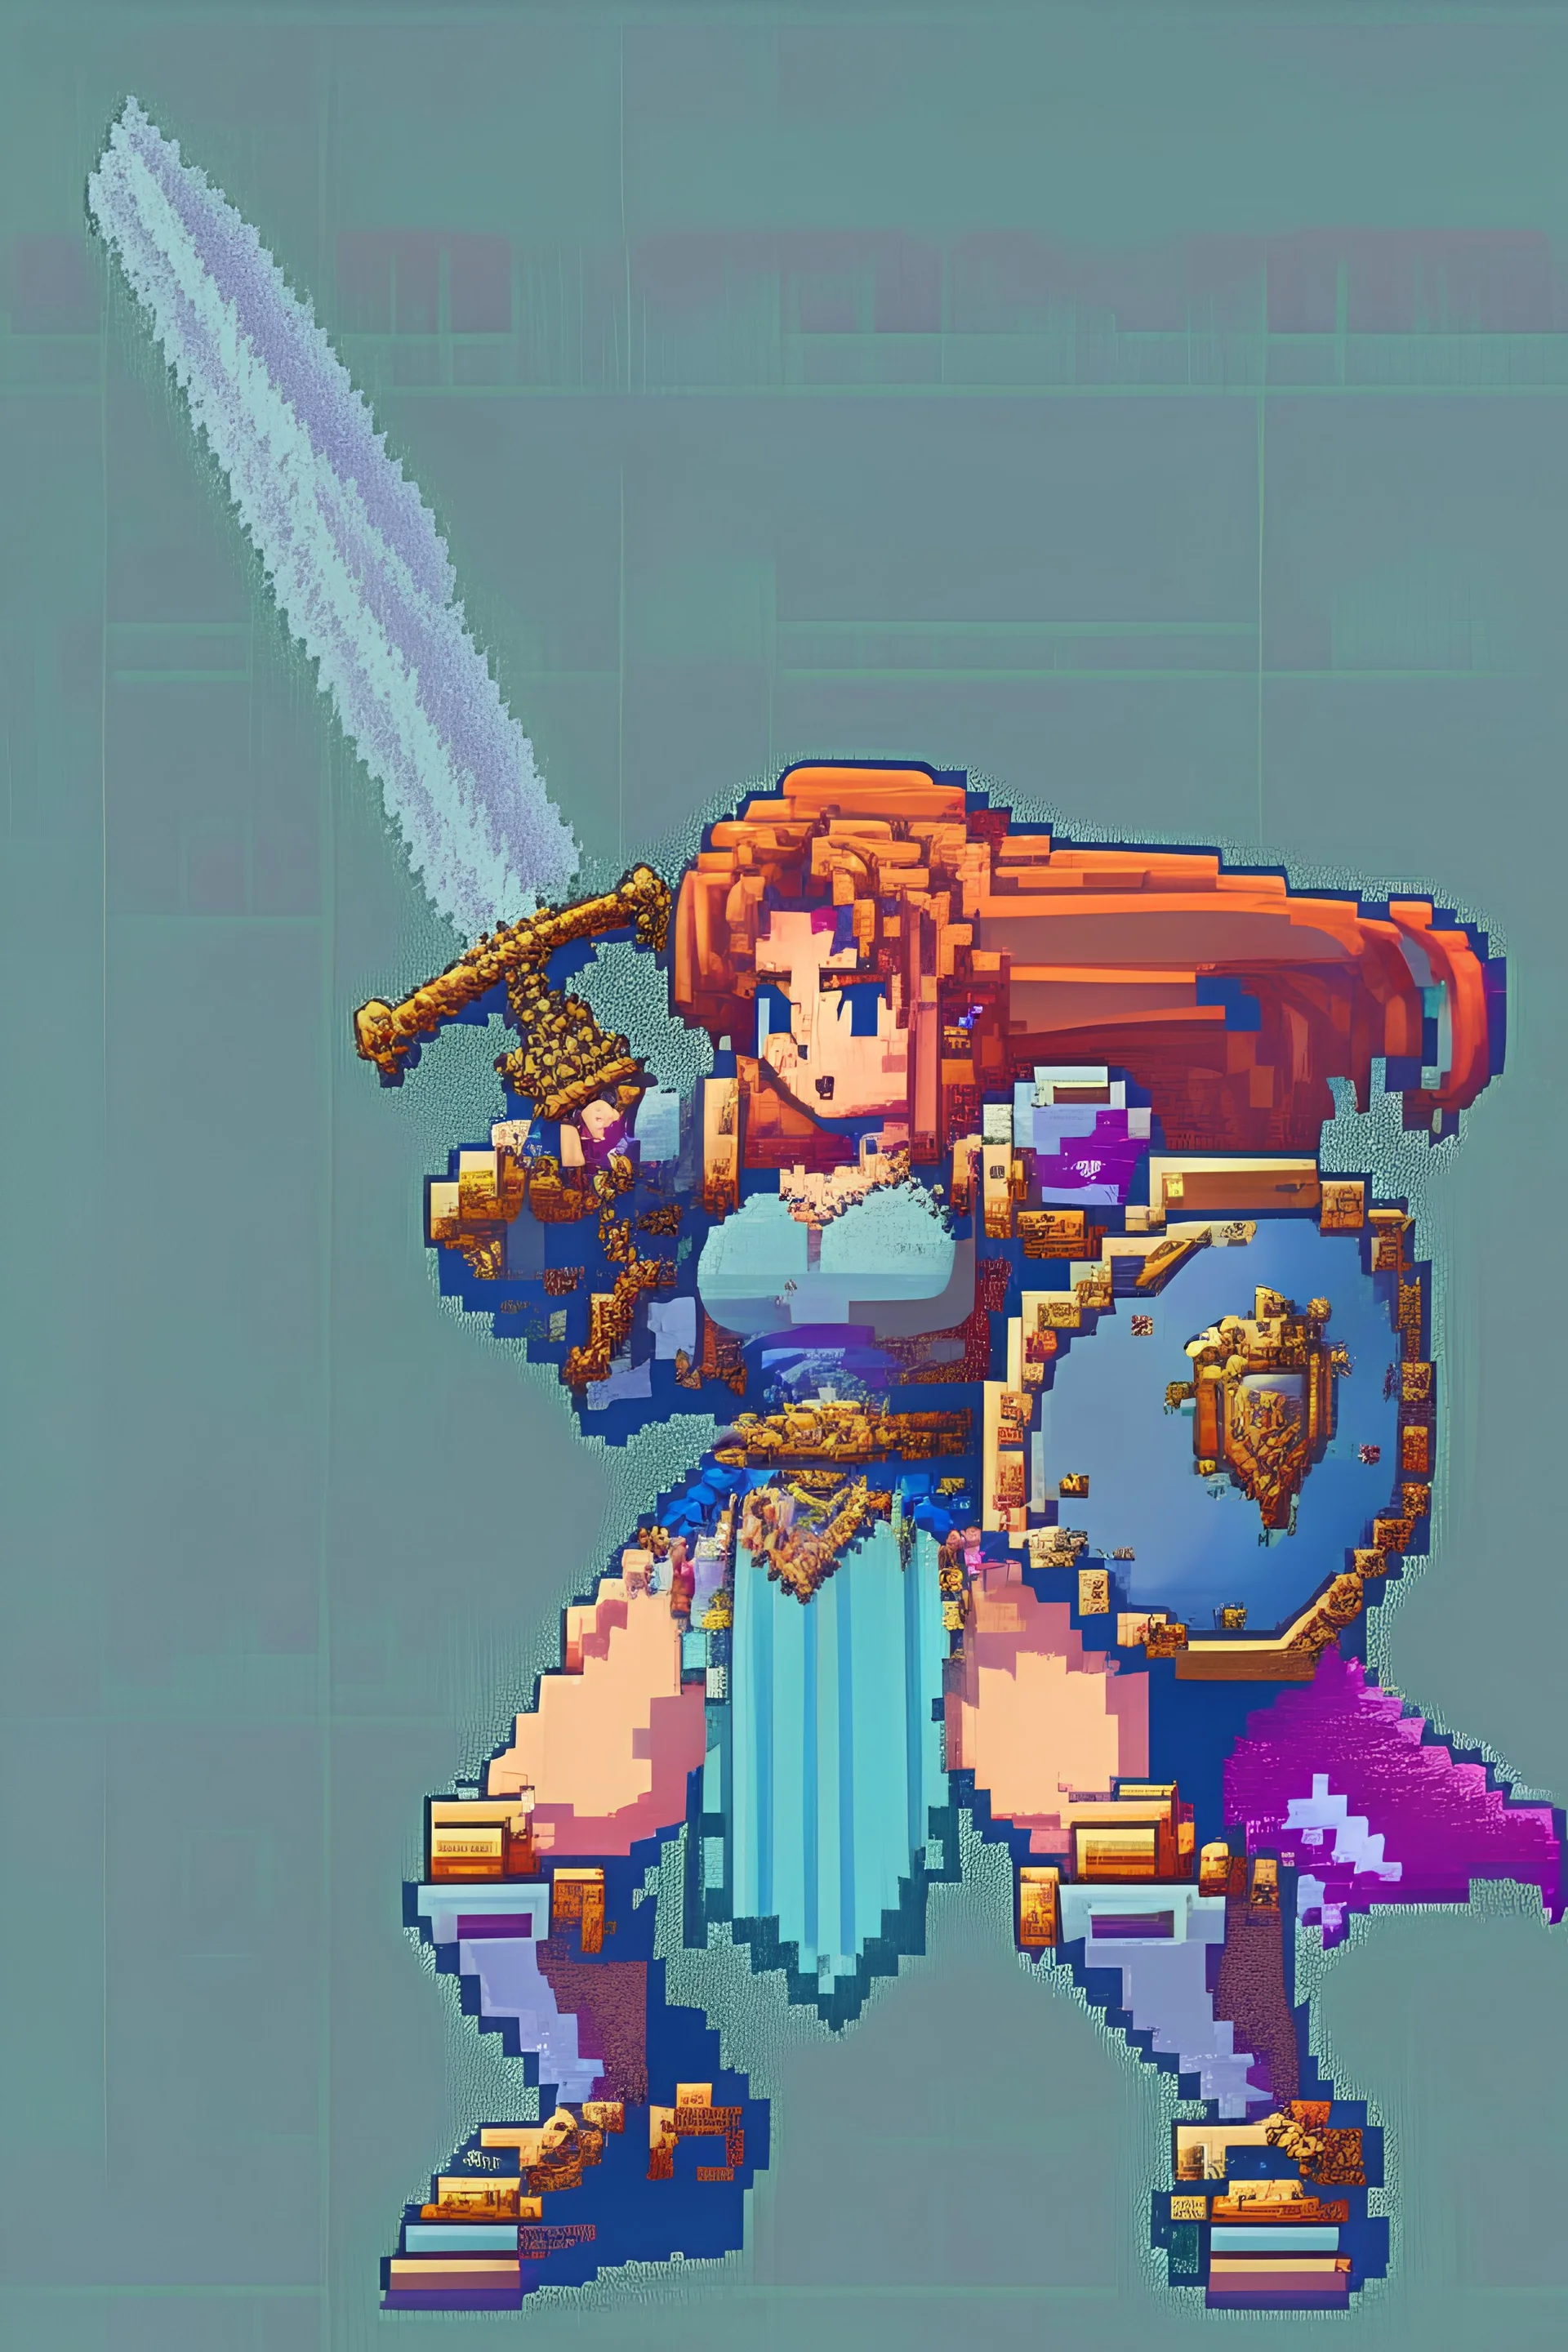 pixel art, 256x256 resolution, anime style rpg character, female paladin swinging an ornate broadsword